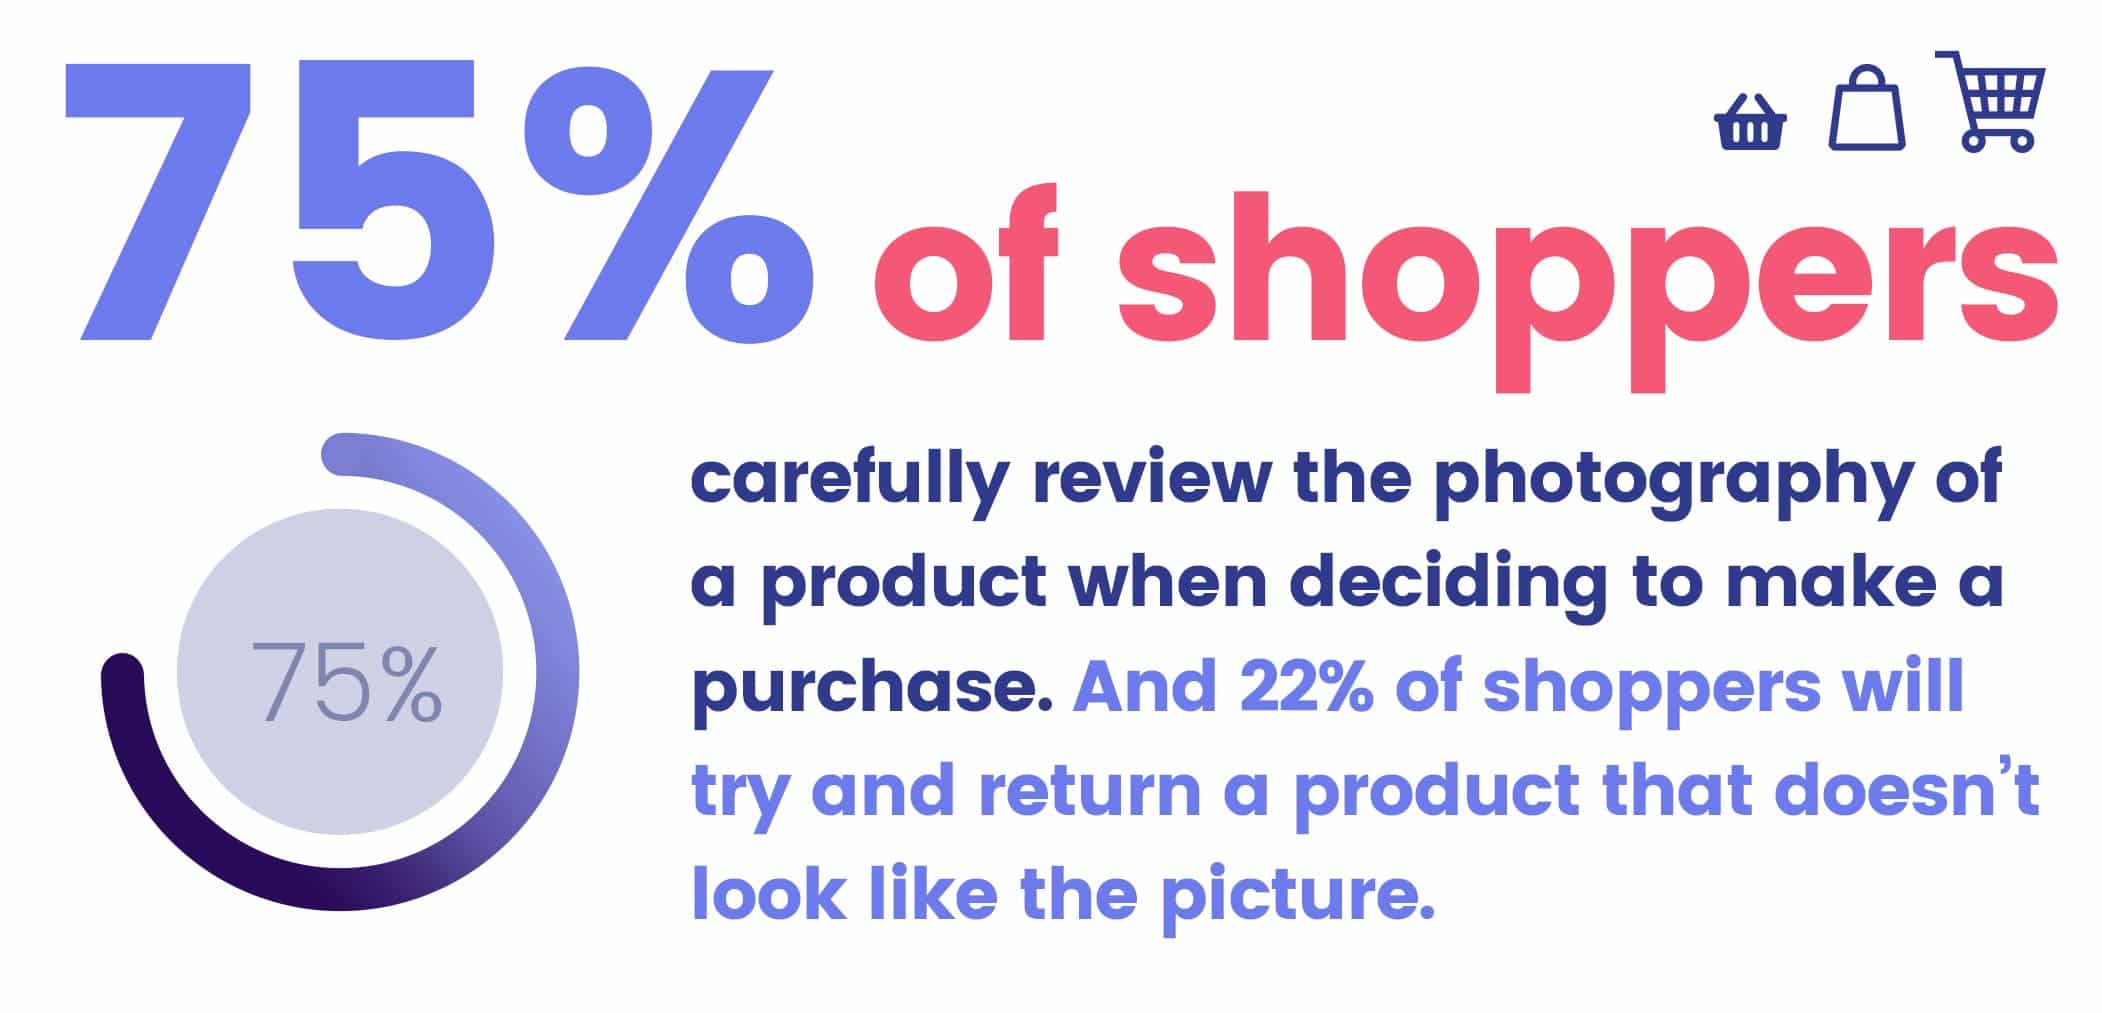 75% of shoppers review photography of a product